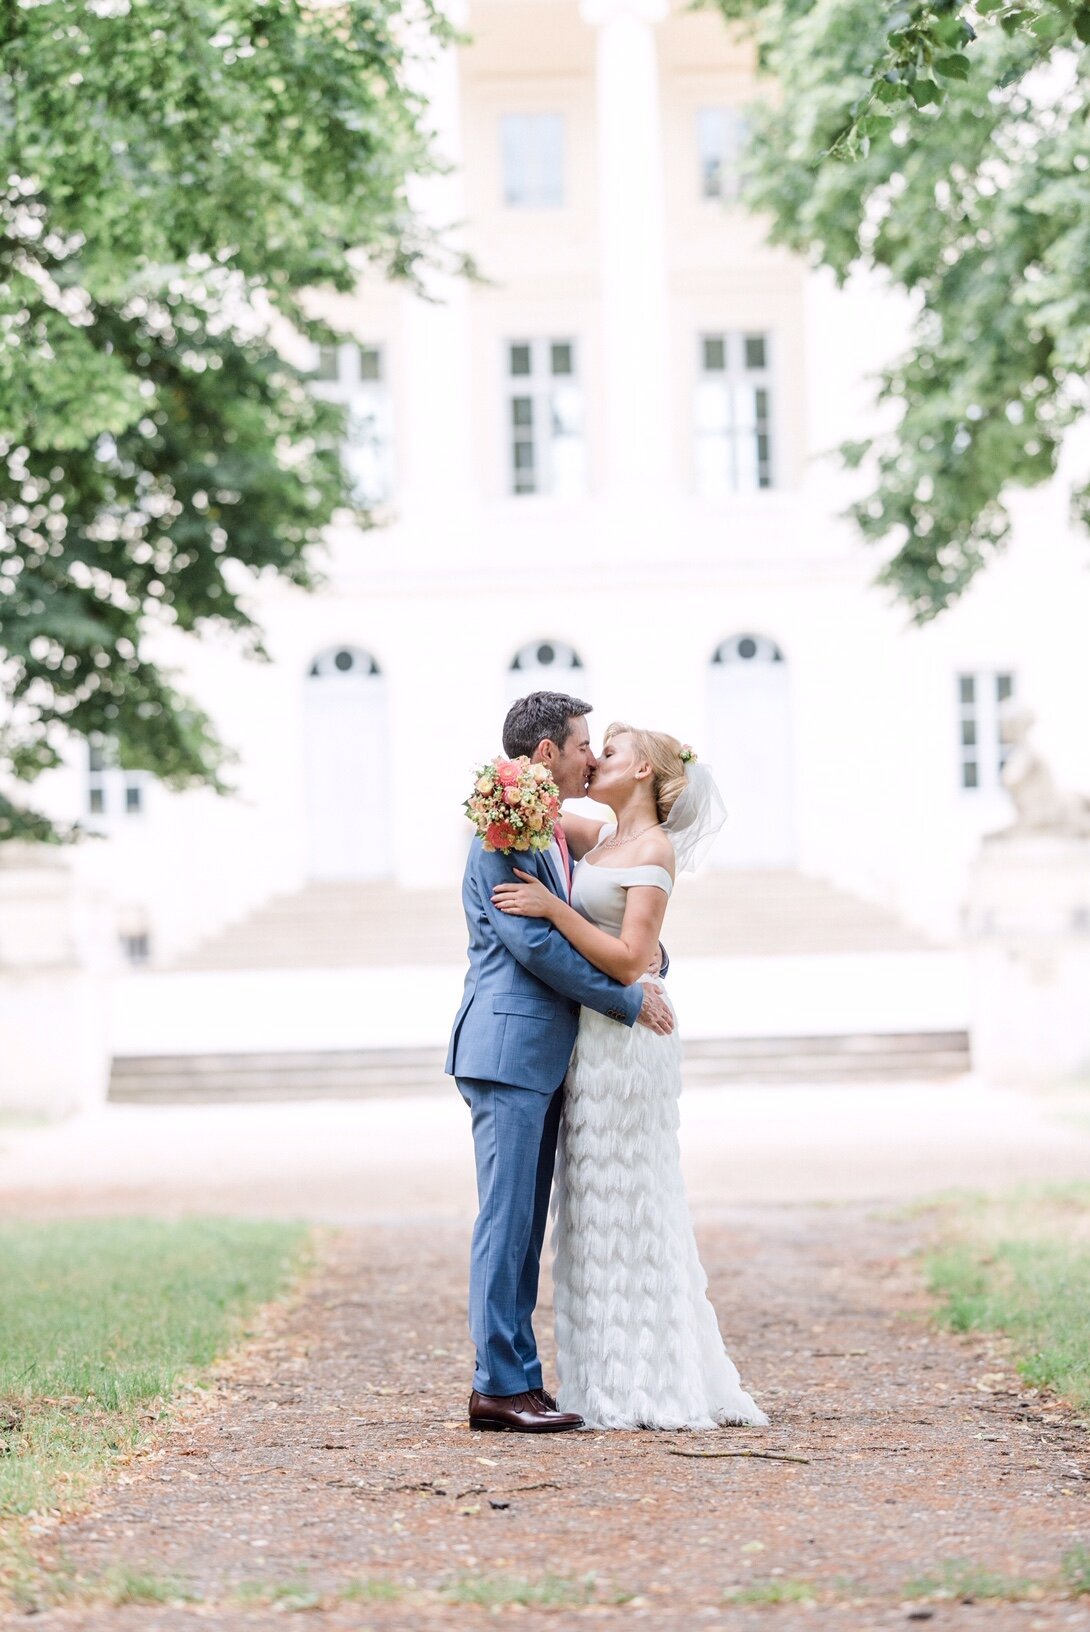 Beautiful bride Julia wears the Ivy skirt and Harbour top from Halfpenny London